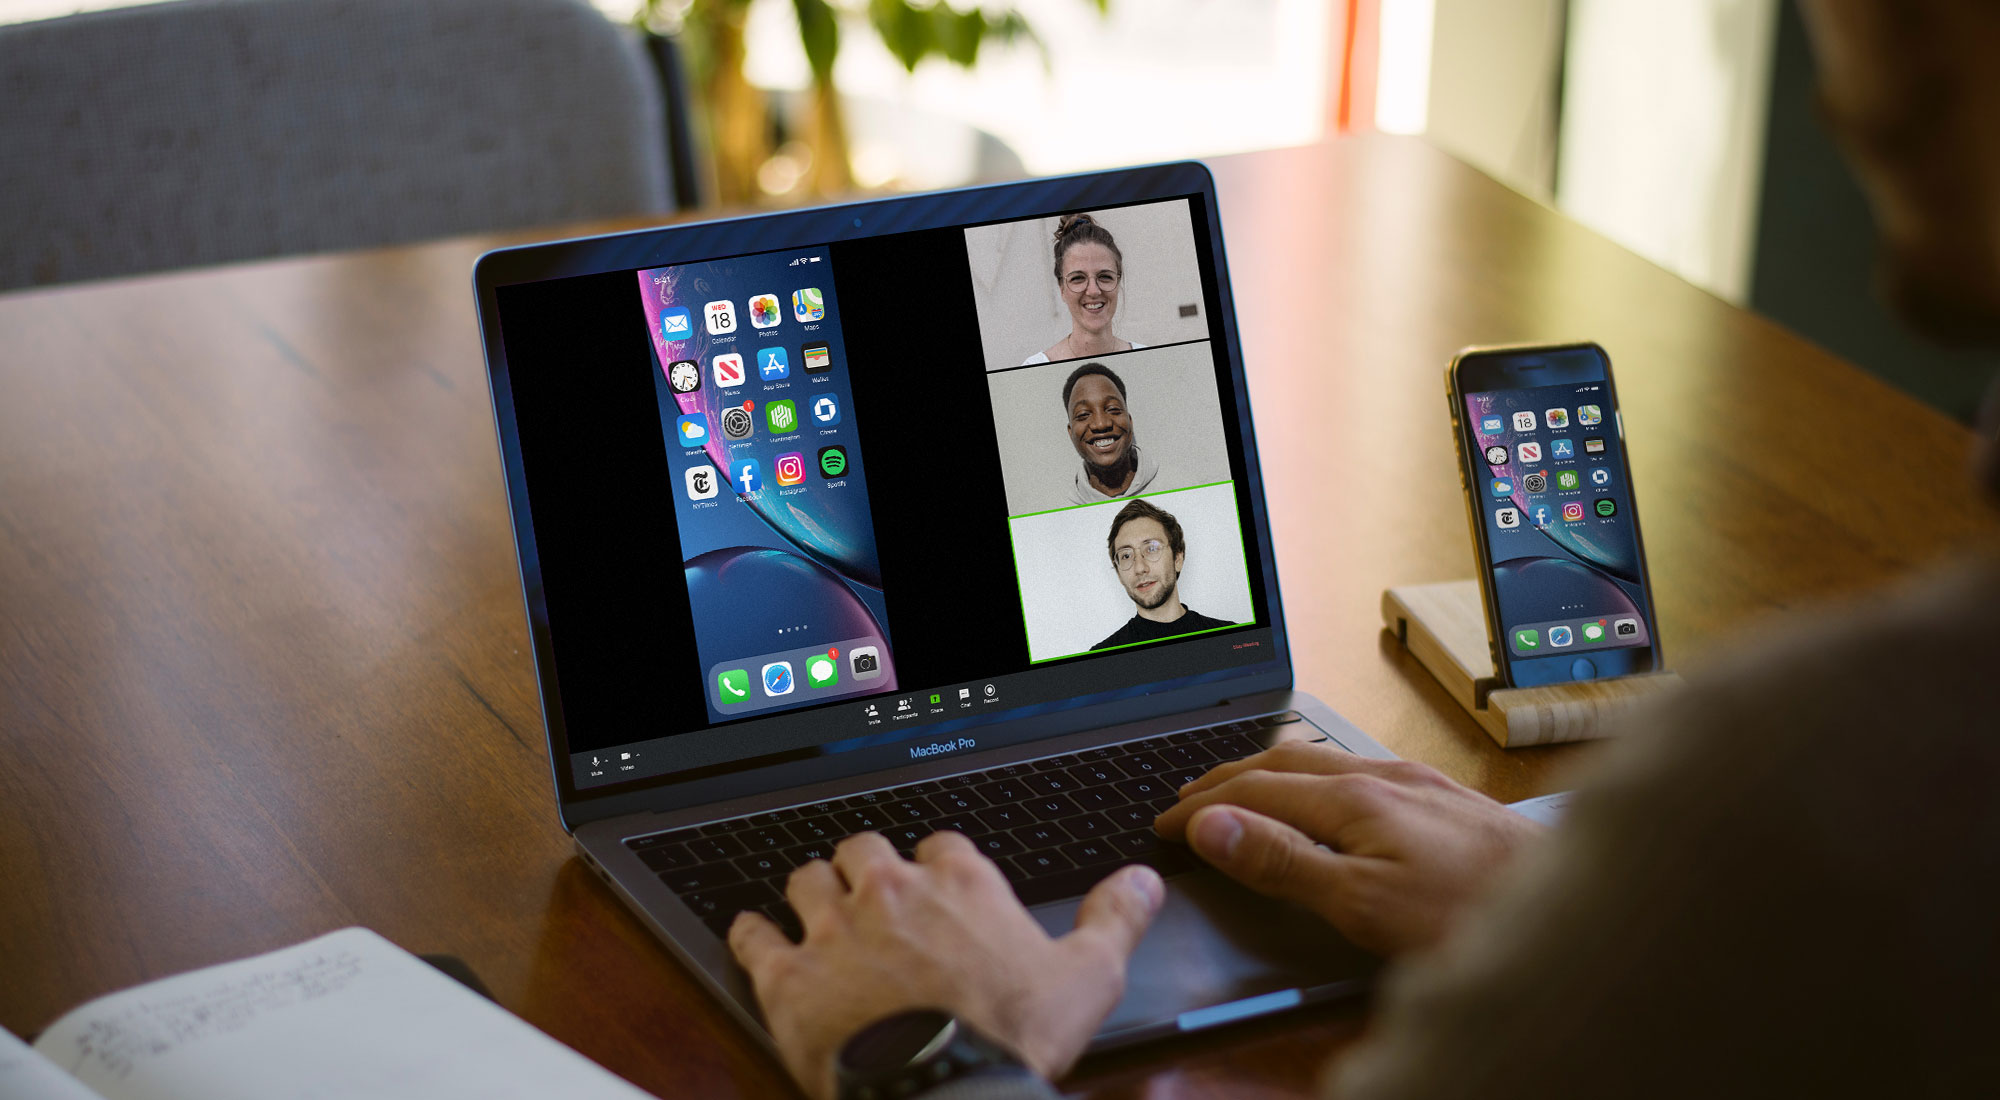 Working from Home? Share Your Screen During Remote Meetings - Featured Image